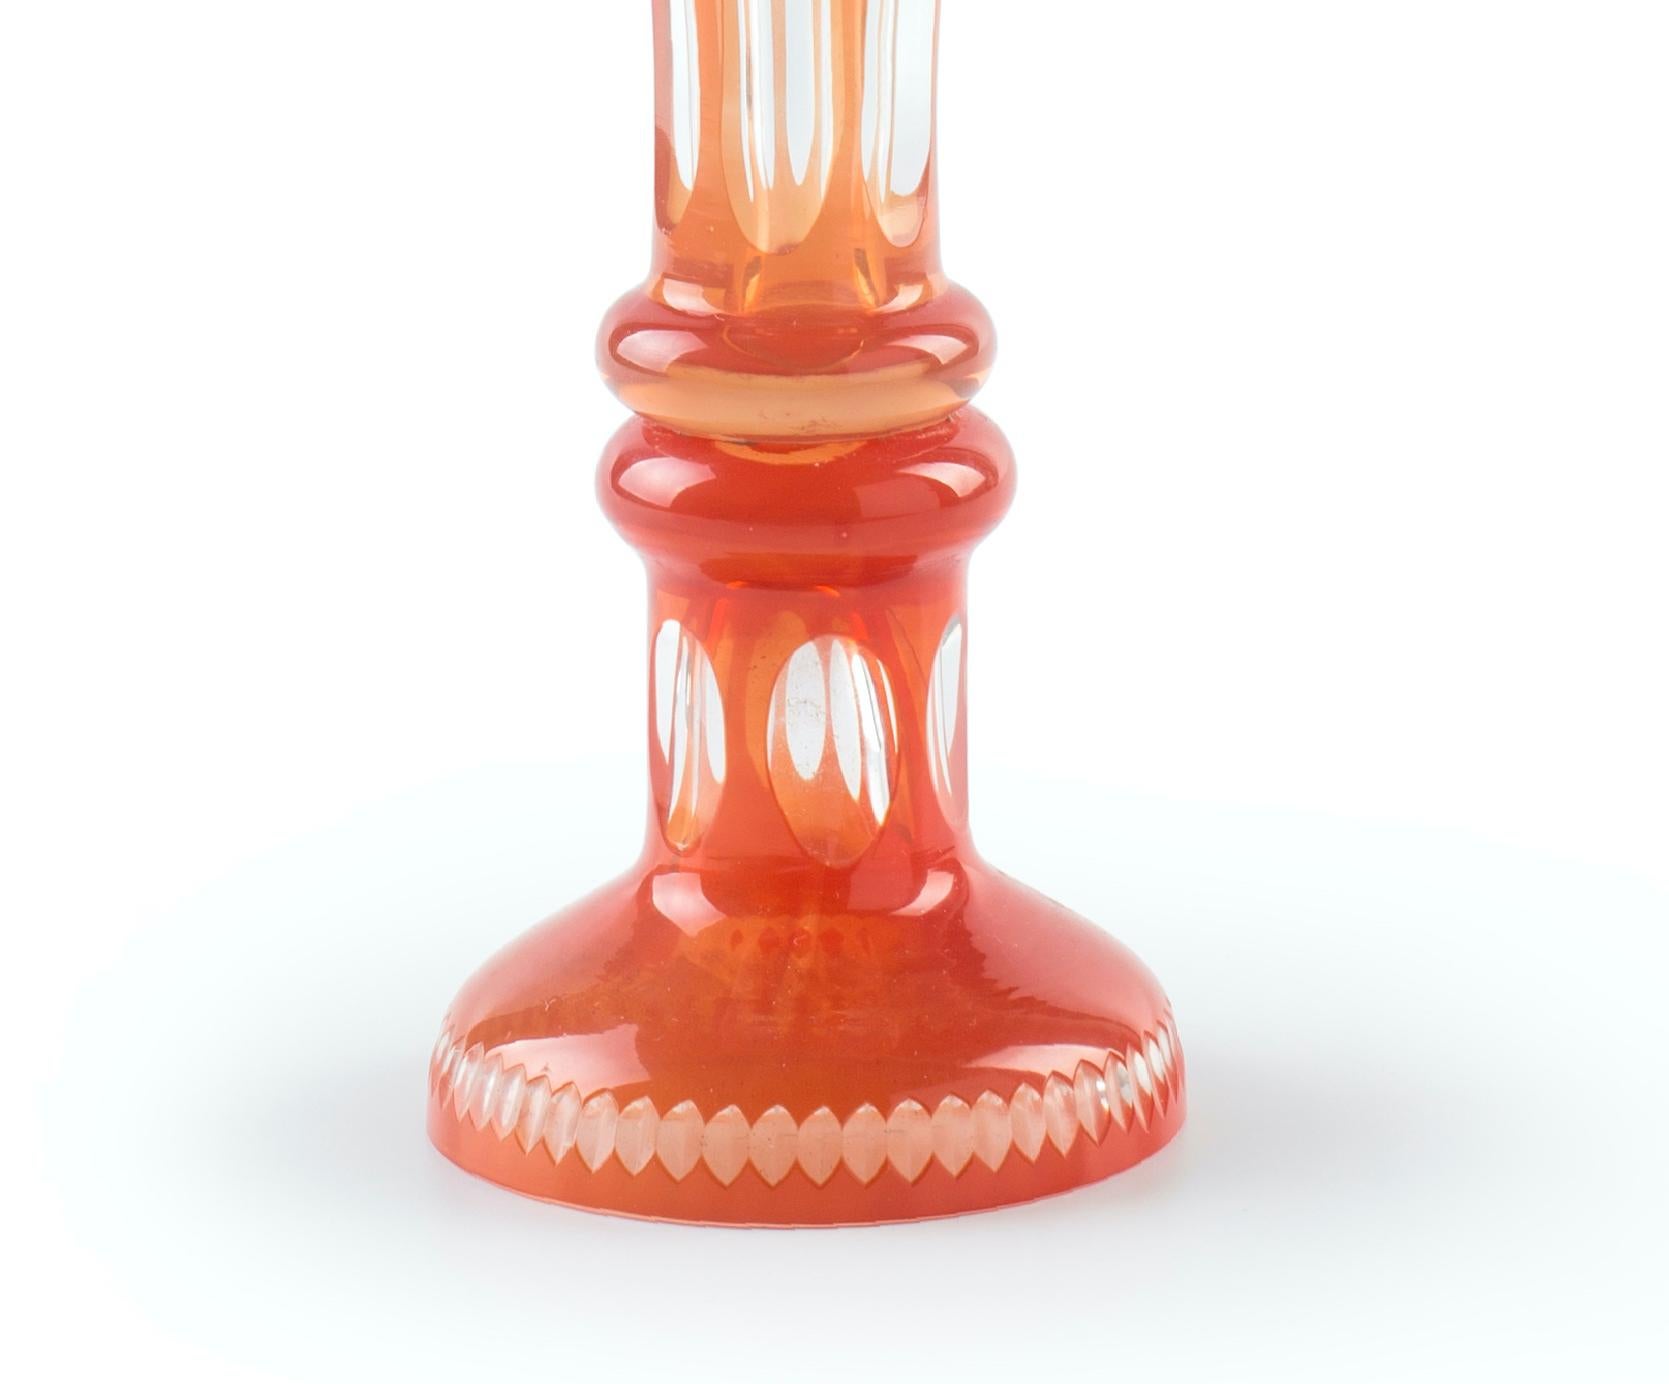 This Vintage glass vase is an original decorative item realized in the mid-20th century.

Very good conditions.

This very precious decorative object is a vintage funnel vase in transparent glass with red and orange nuances.